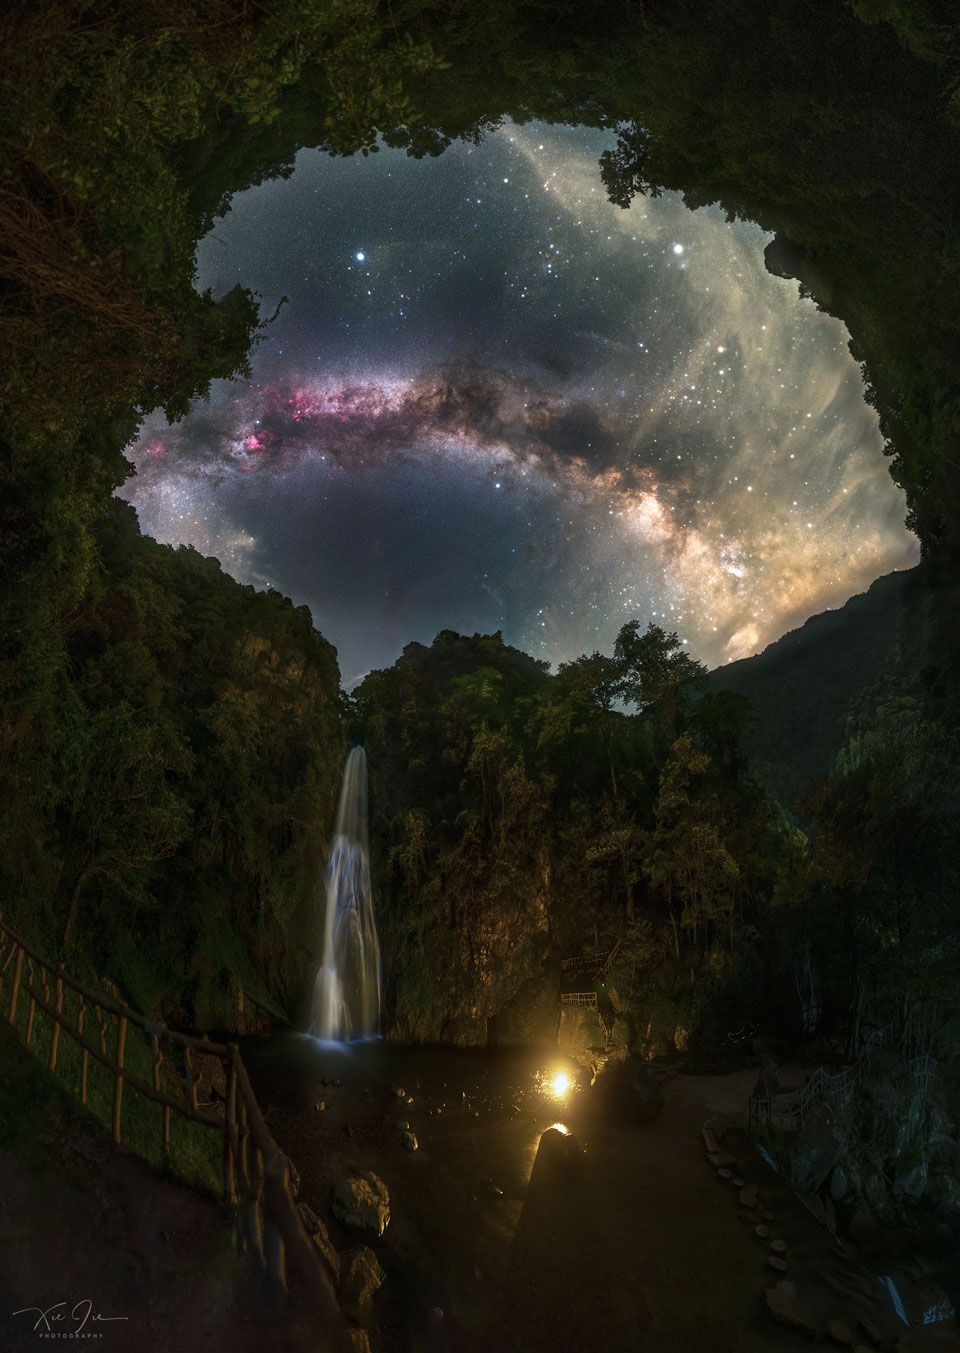 The picture shows a waterfall under a night sky 
dominated by the arch of our Milky Way Galaxy. 
Please see the explanation for more detailed information.